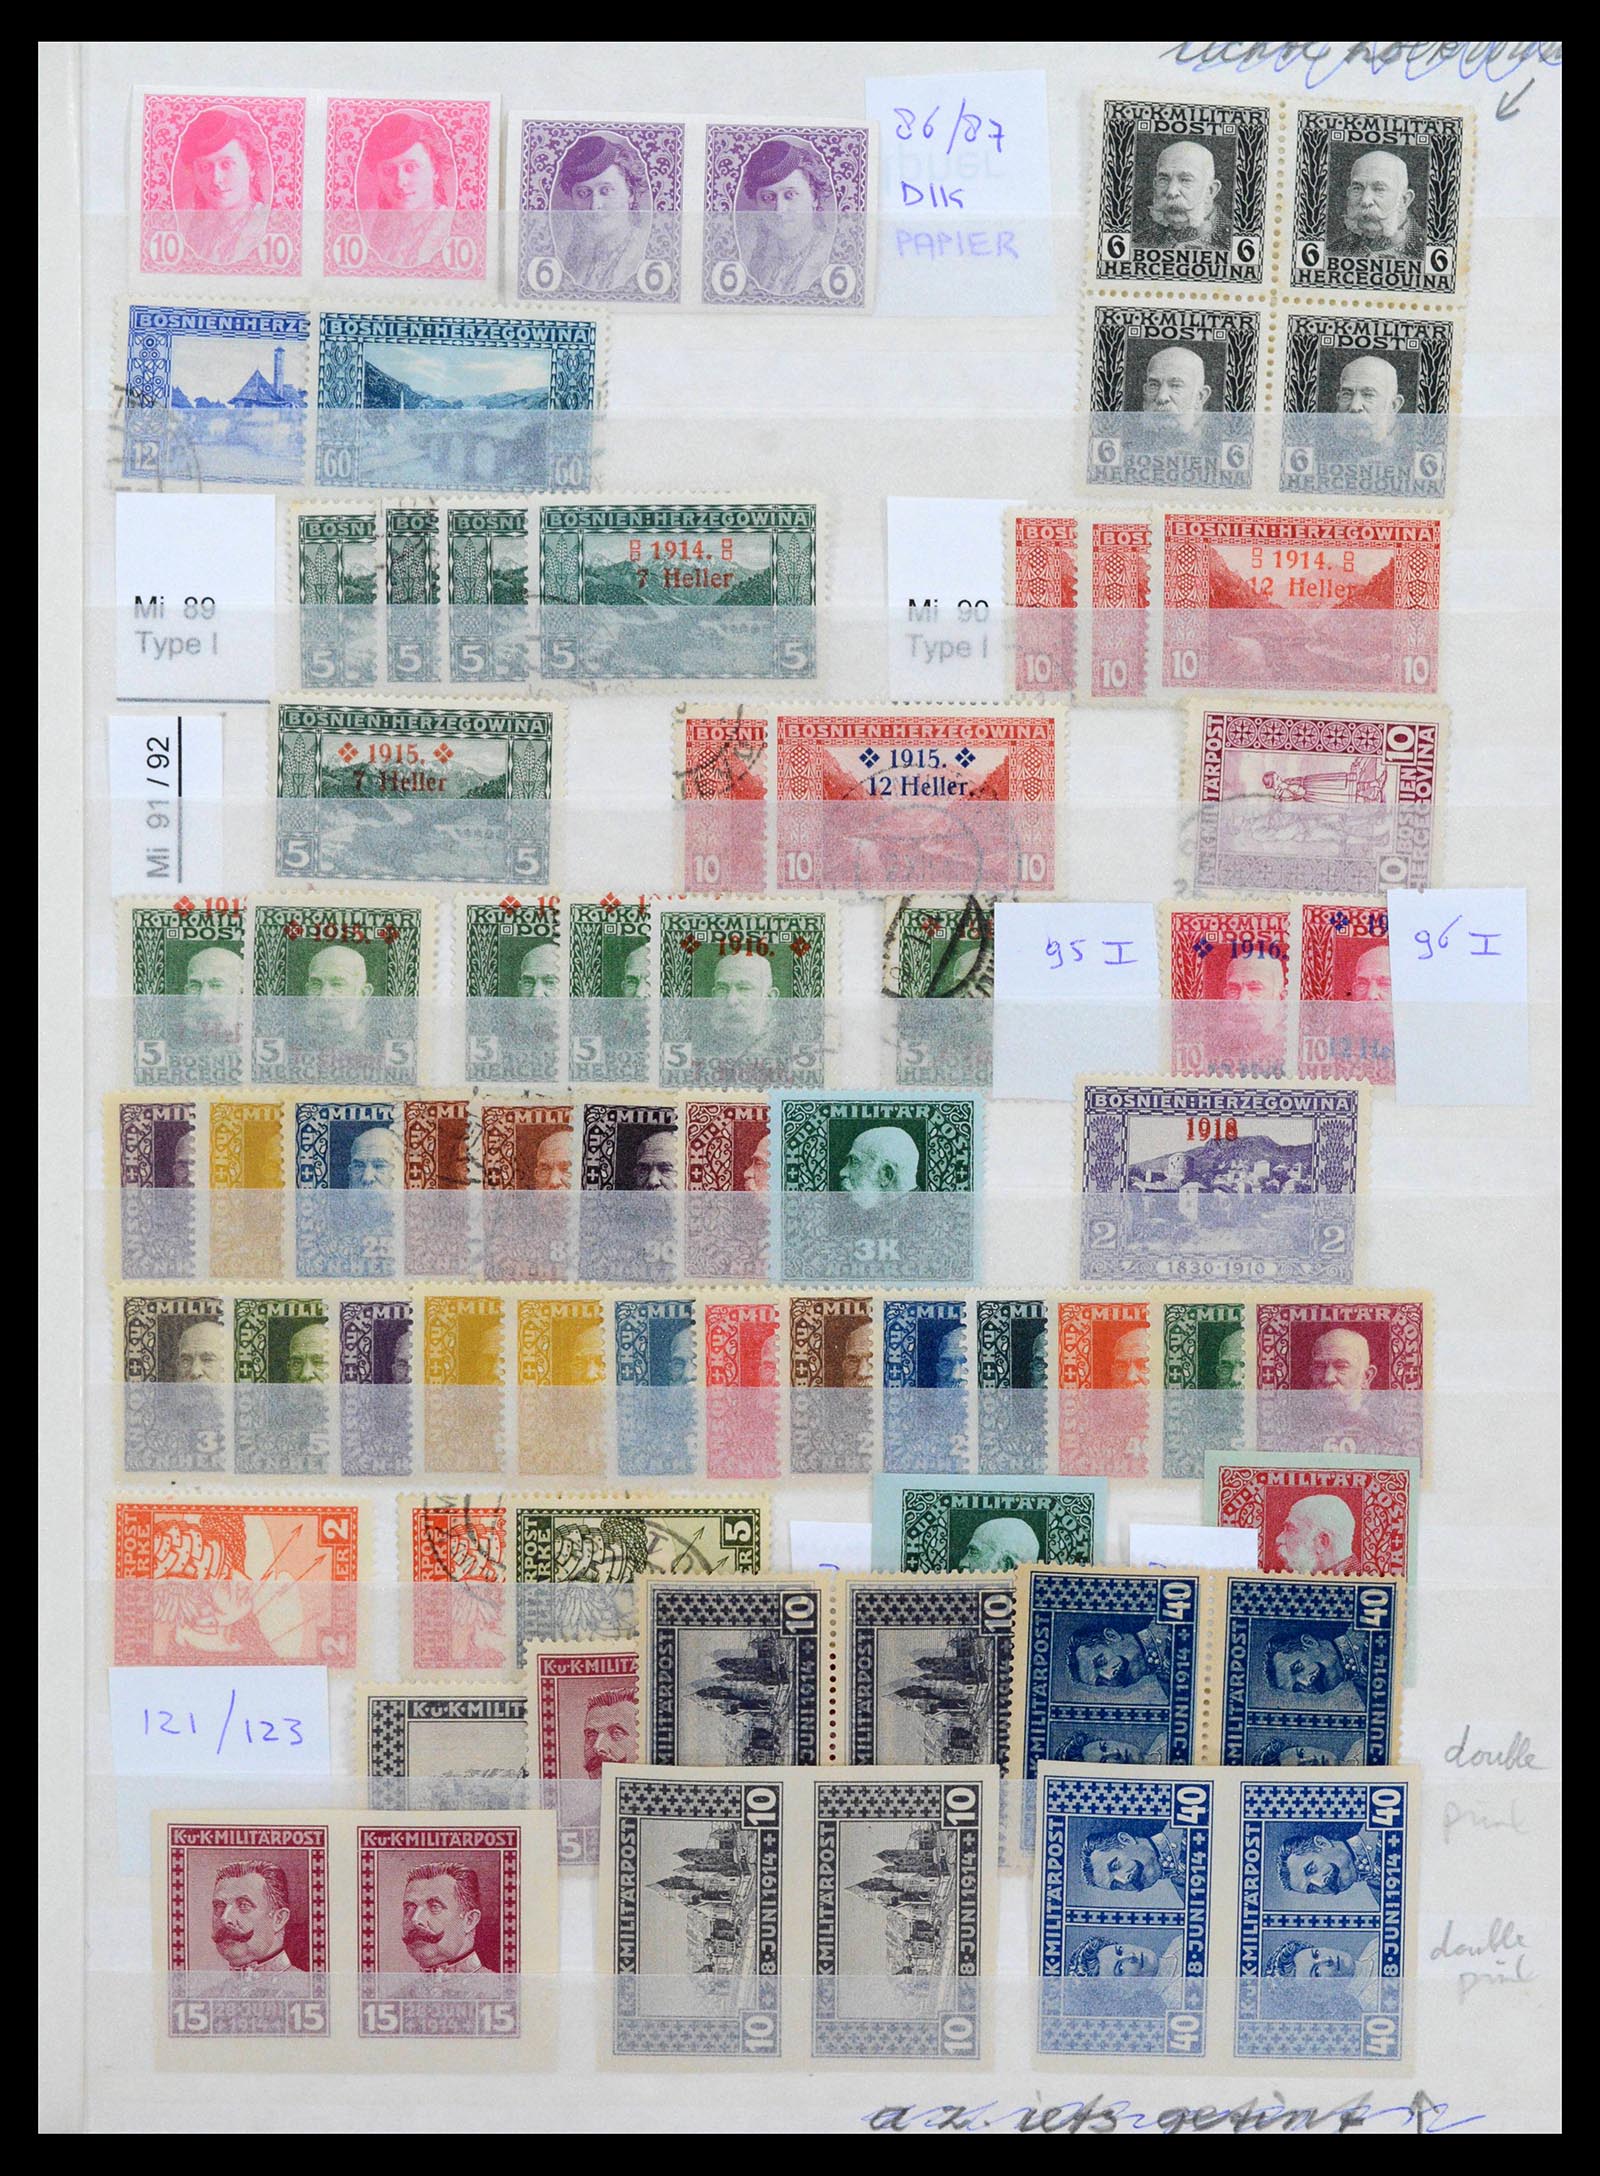 39044 0003 - Stamp collection 39044 European countries 1900-1945.